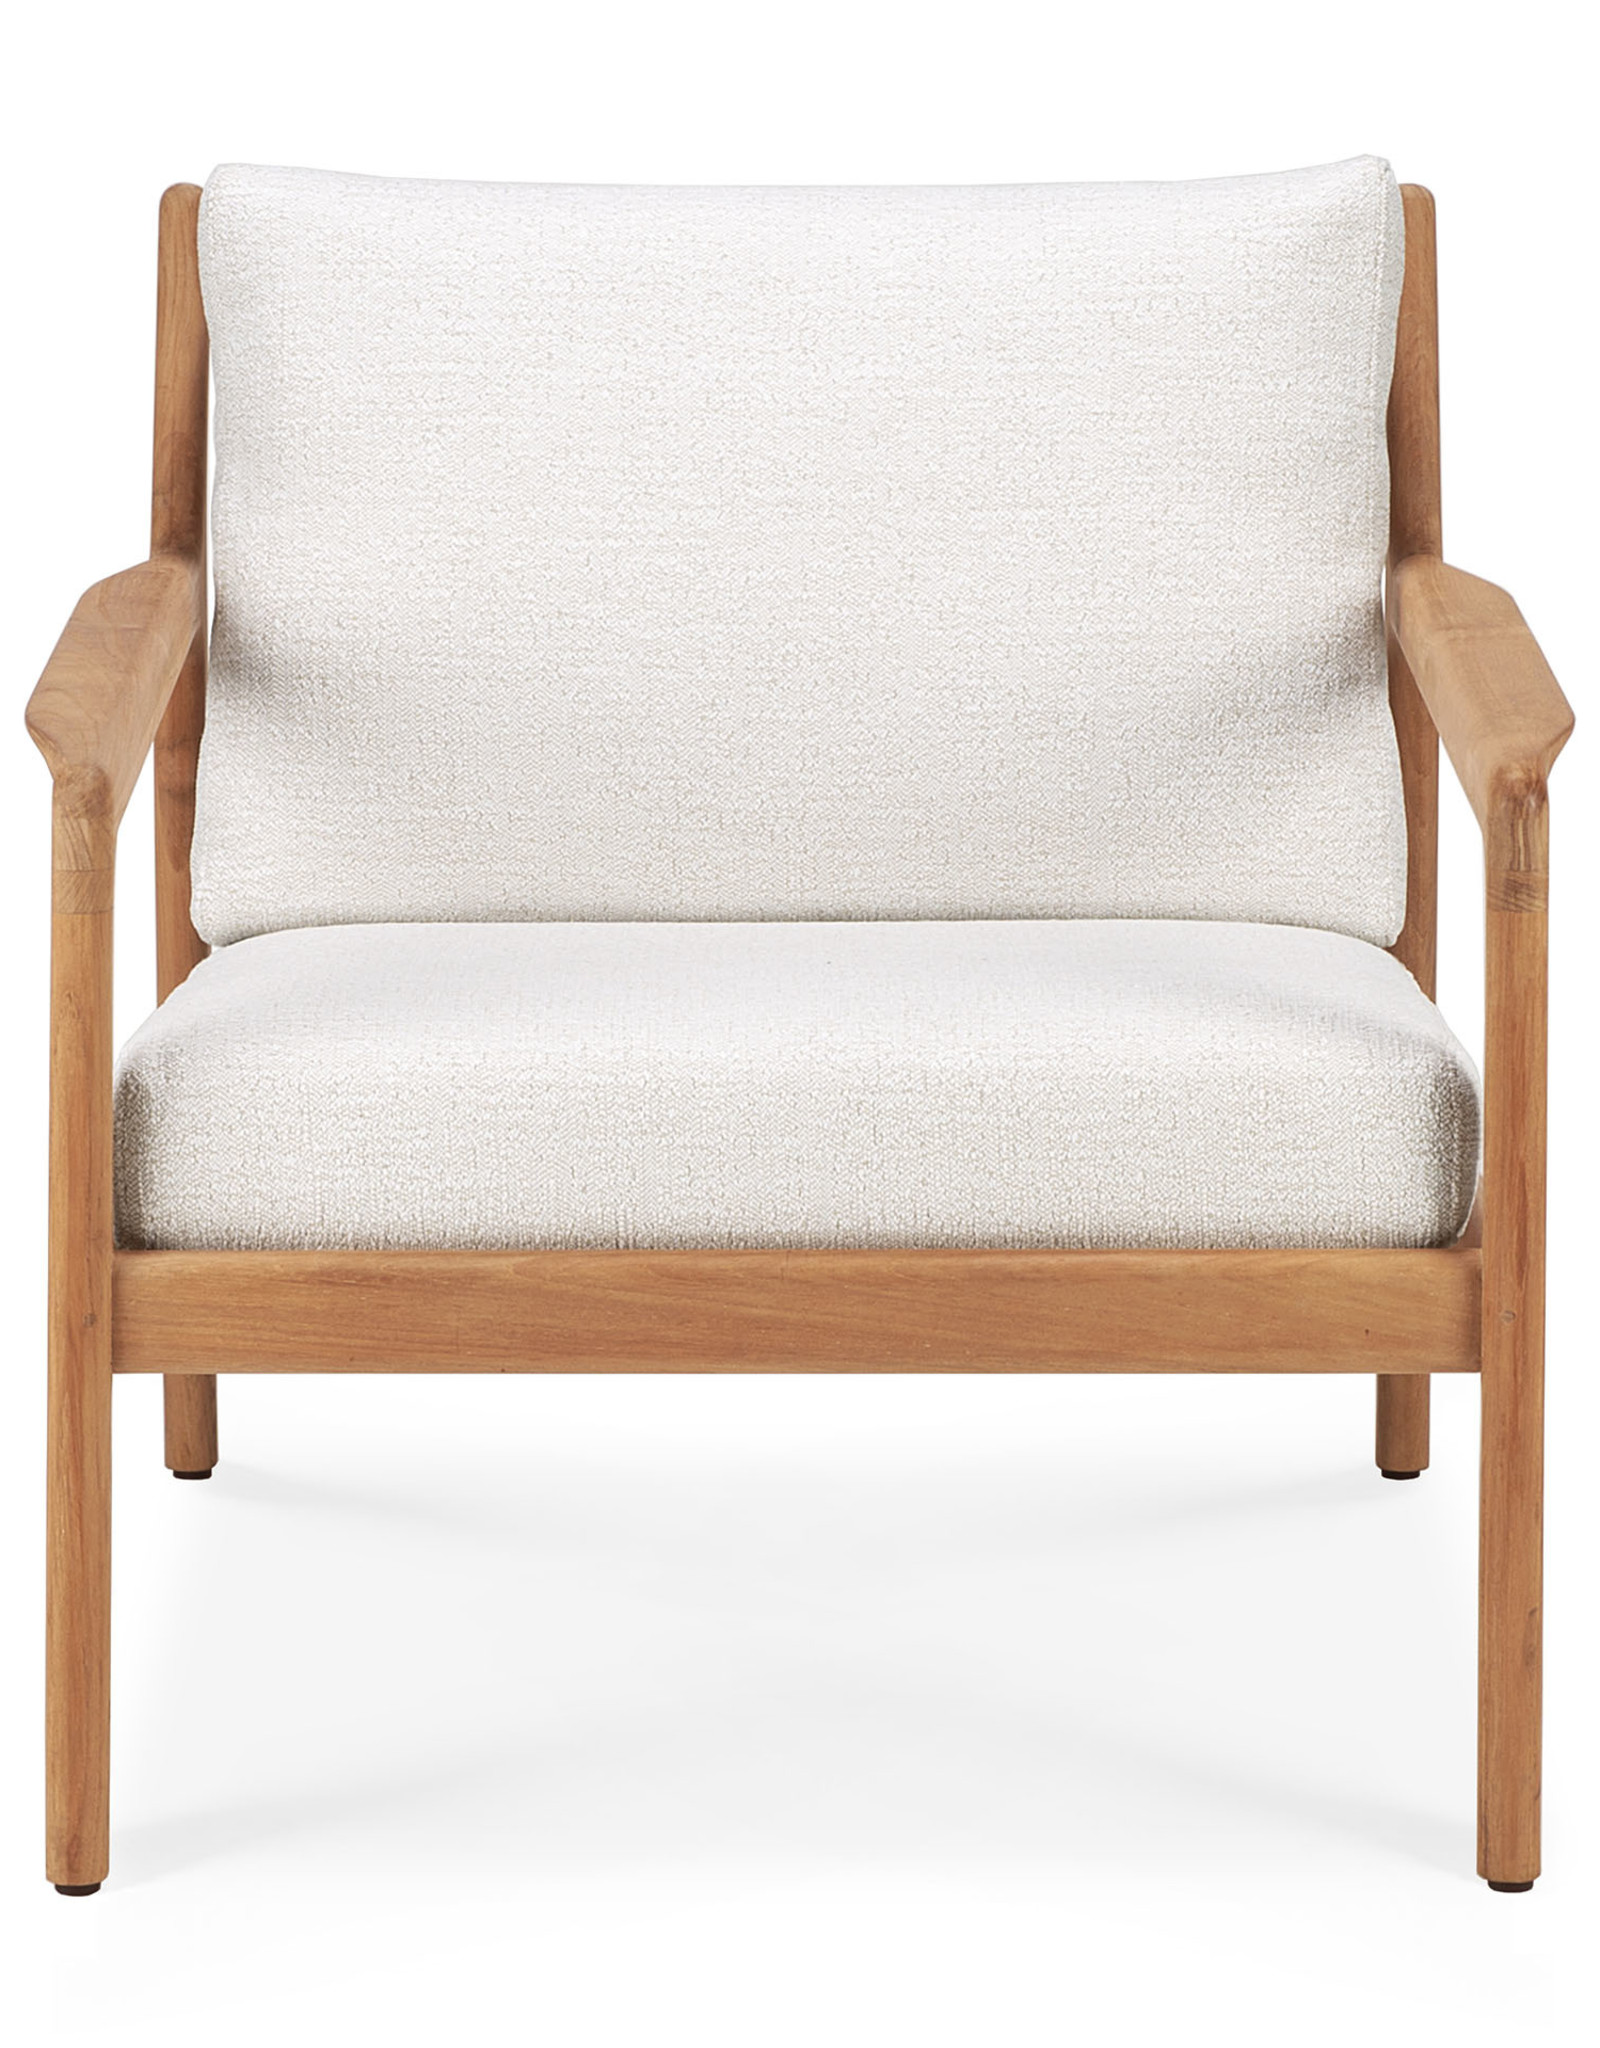 Teak Jack Outdoor Lounge Chair - Off White